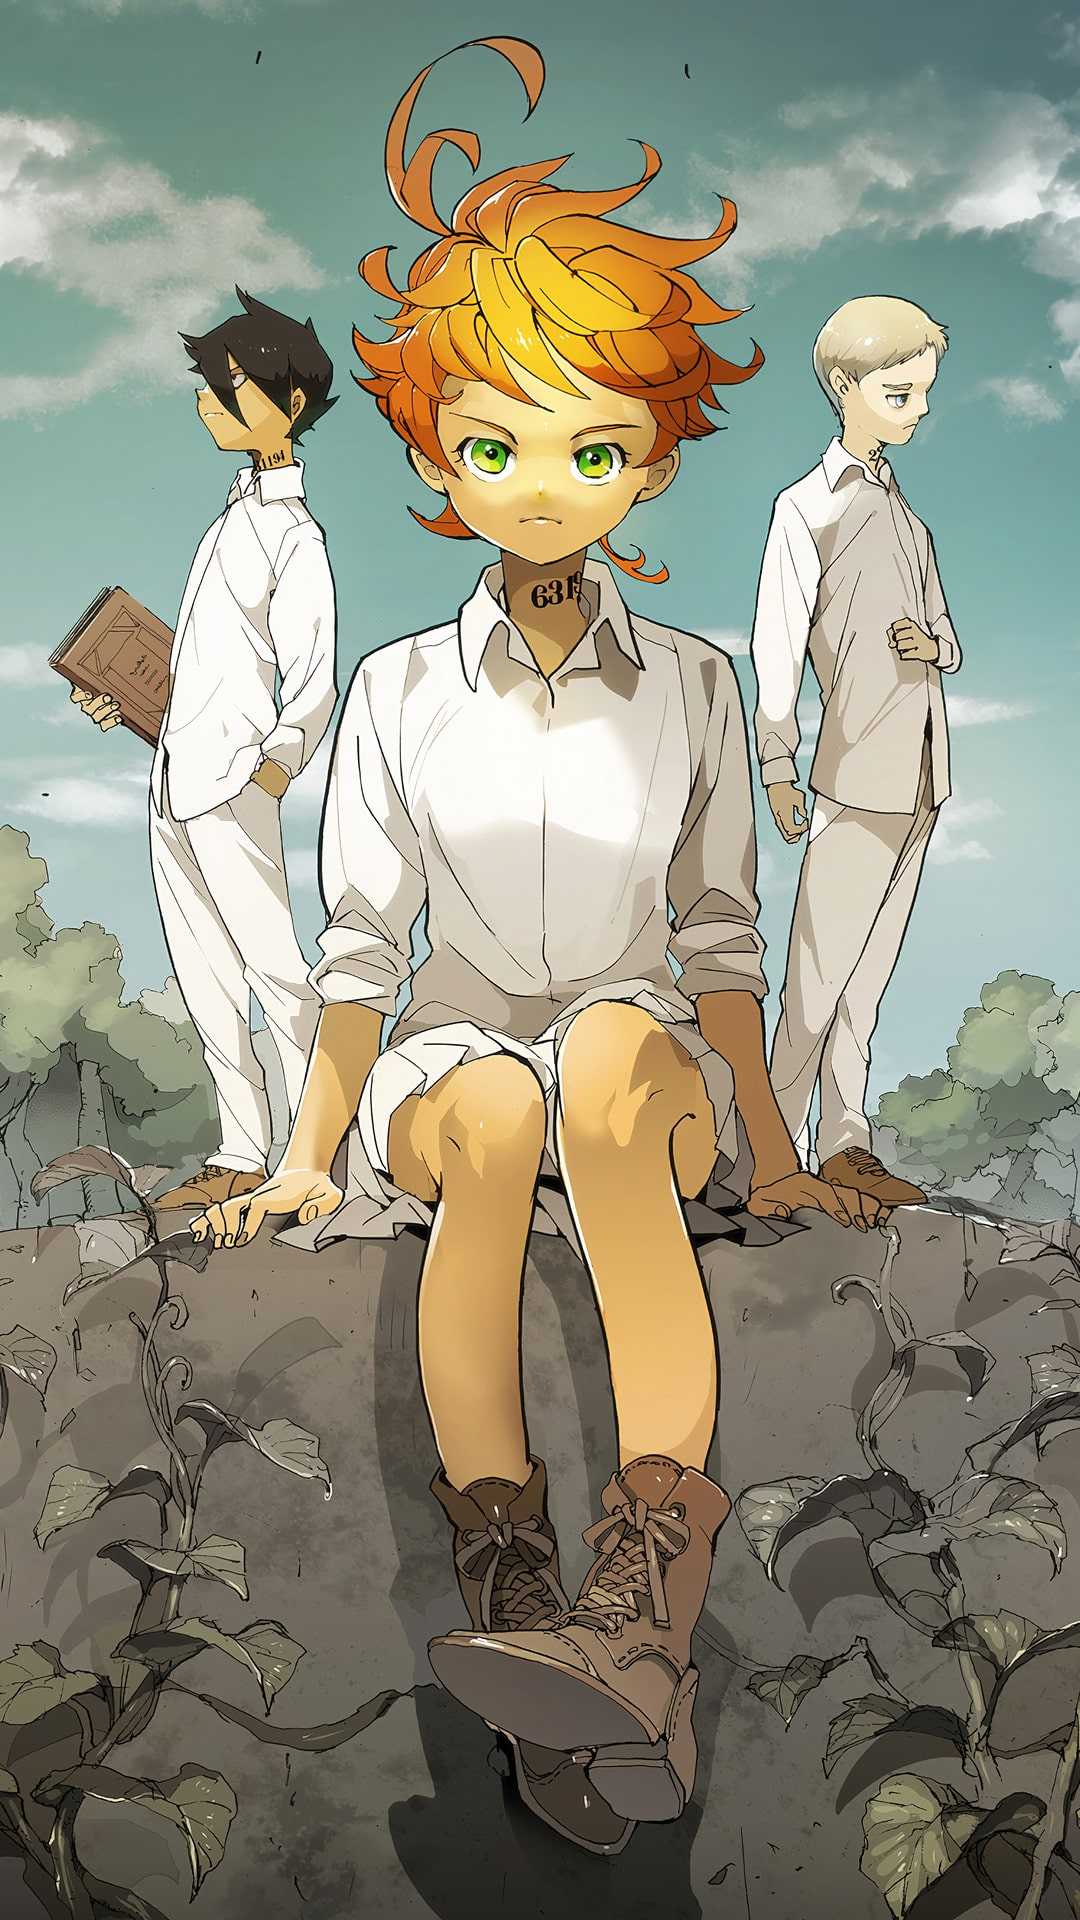 The Promised Neverland Wallpapers - WallpaperChain